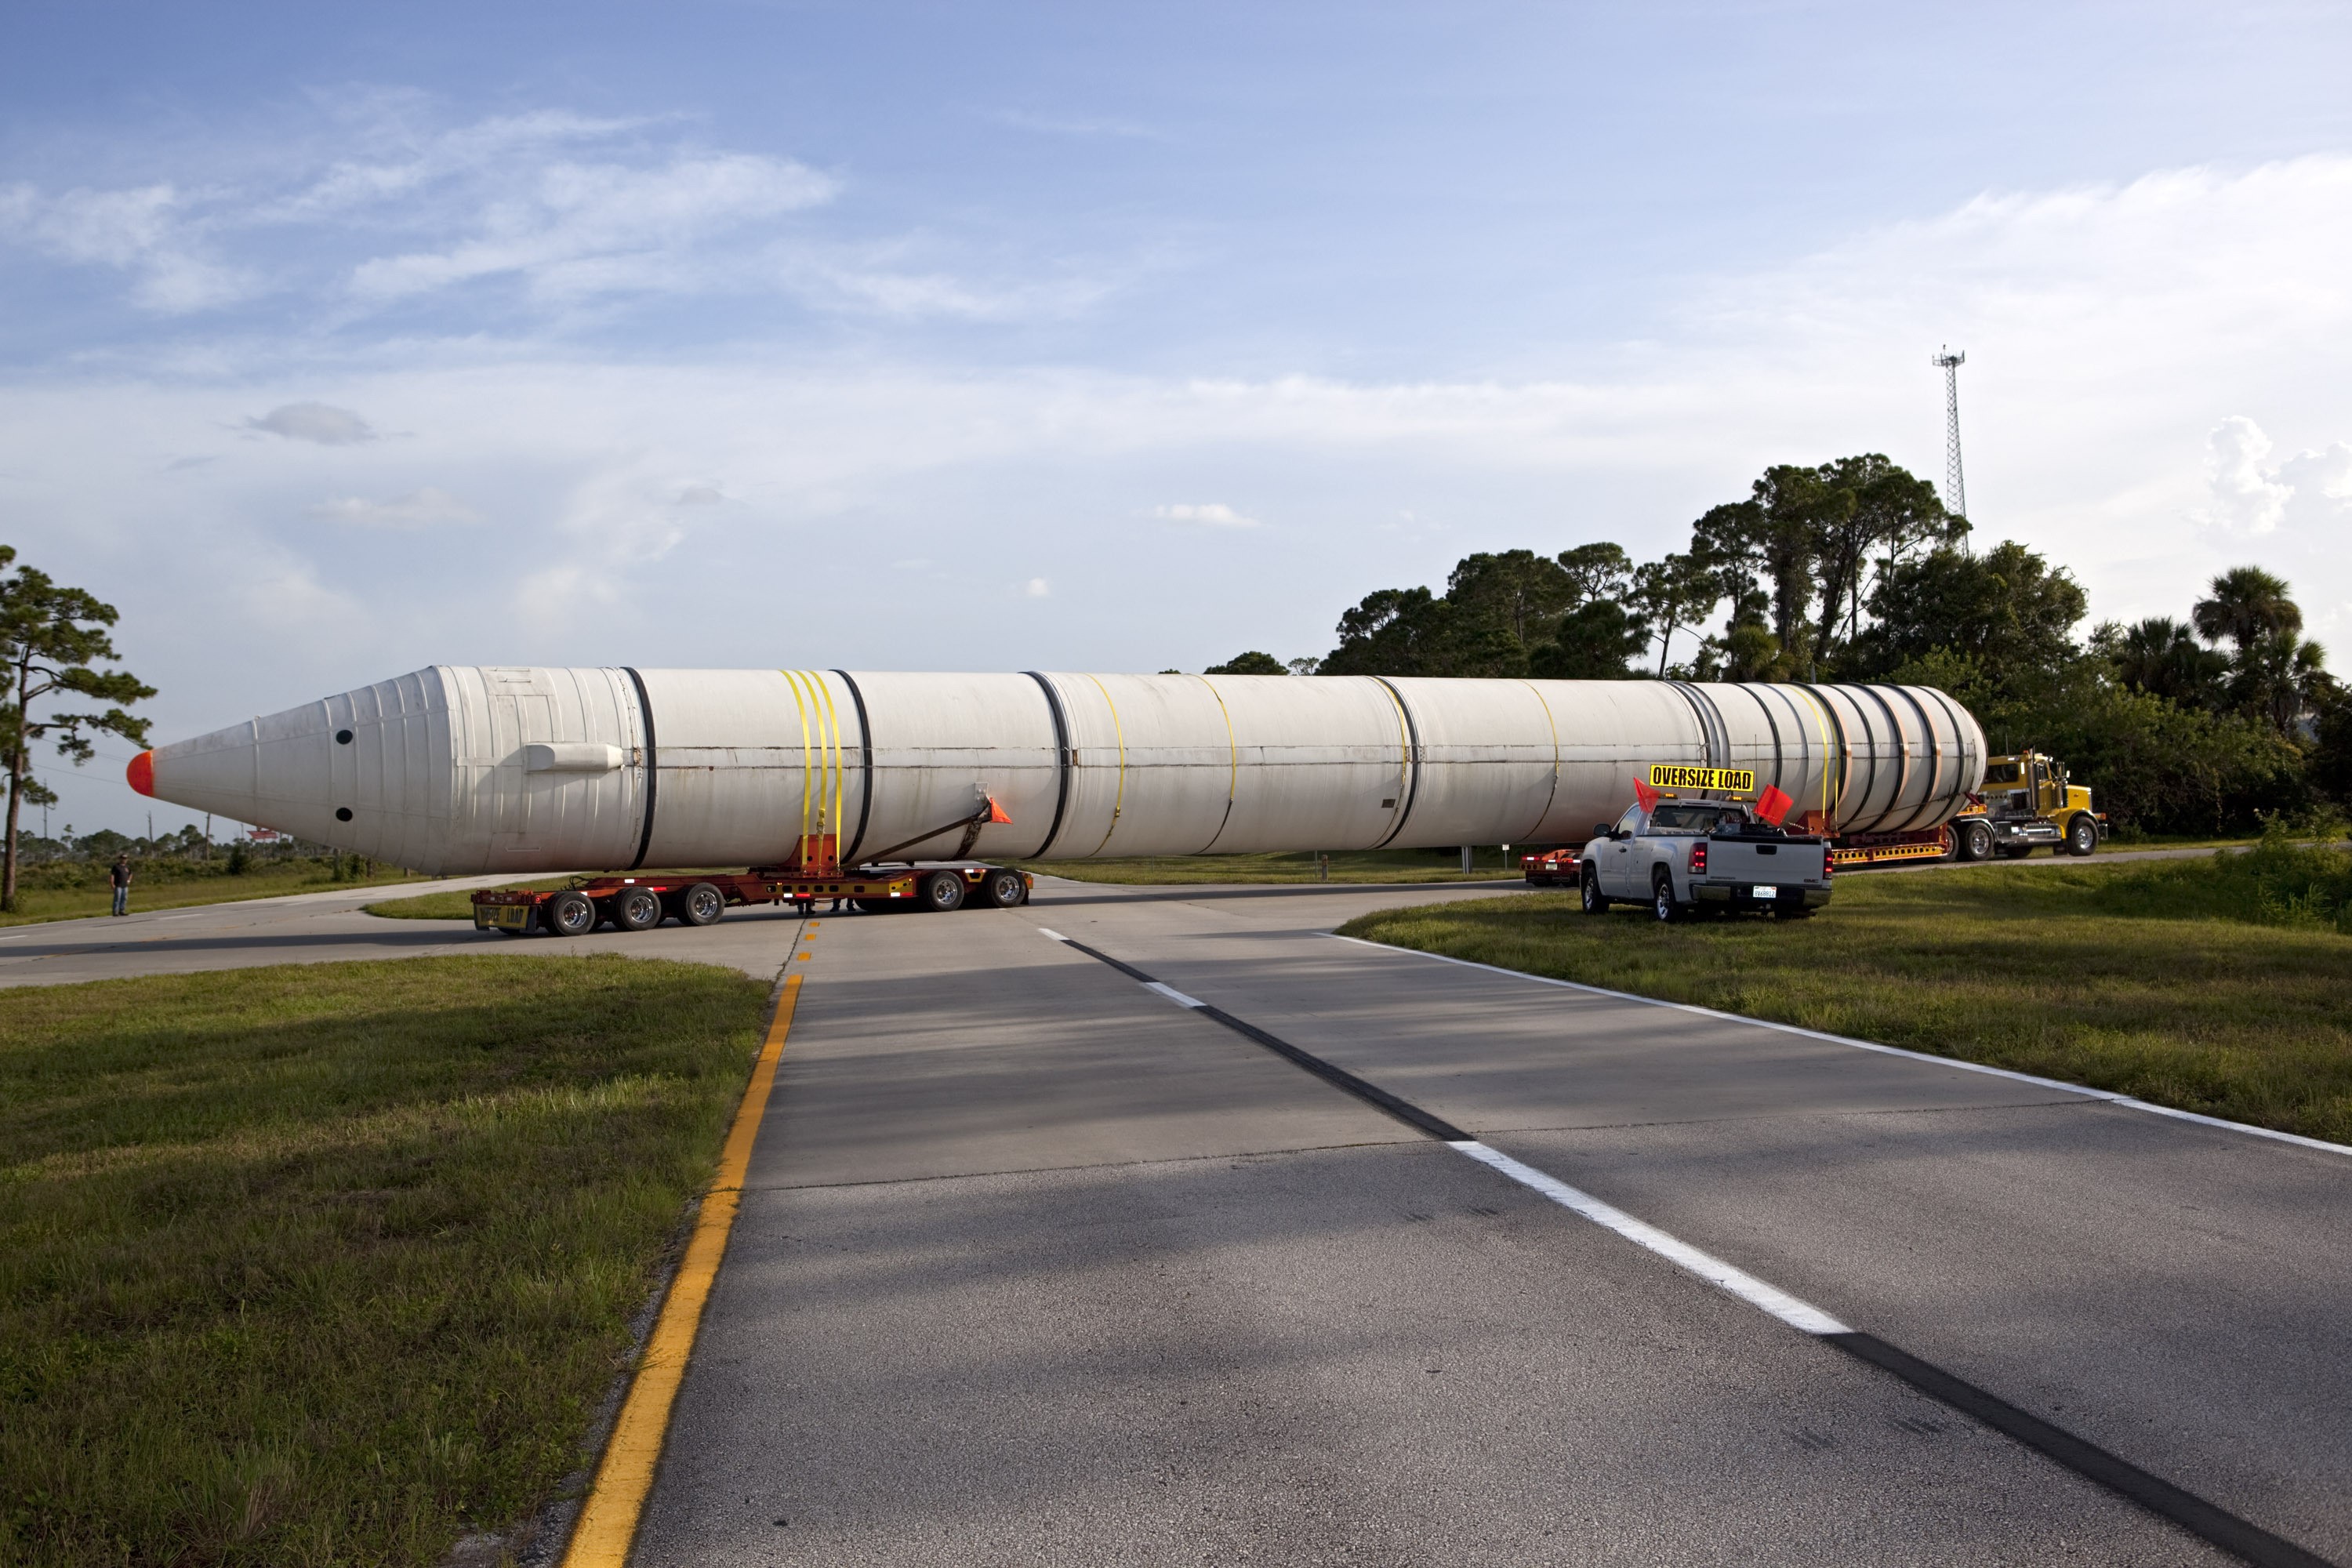 A space shuttle solid rocket booster is being transported by truck to California.